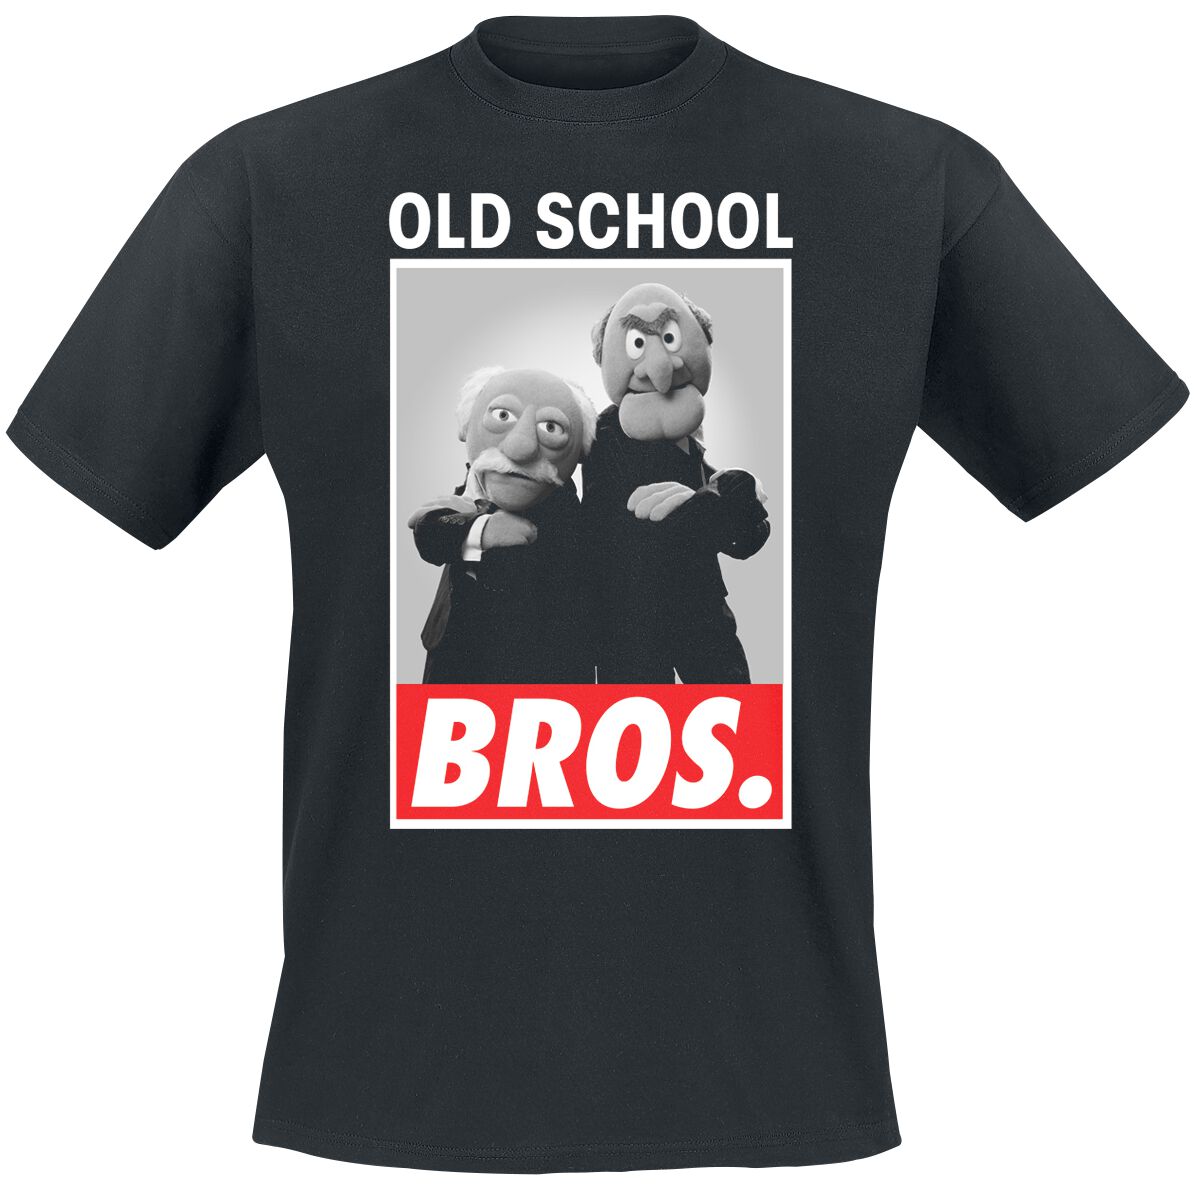 The Muppets Old School Bros. T-Shirt black